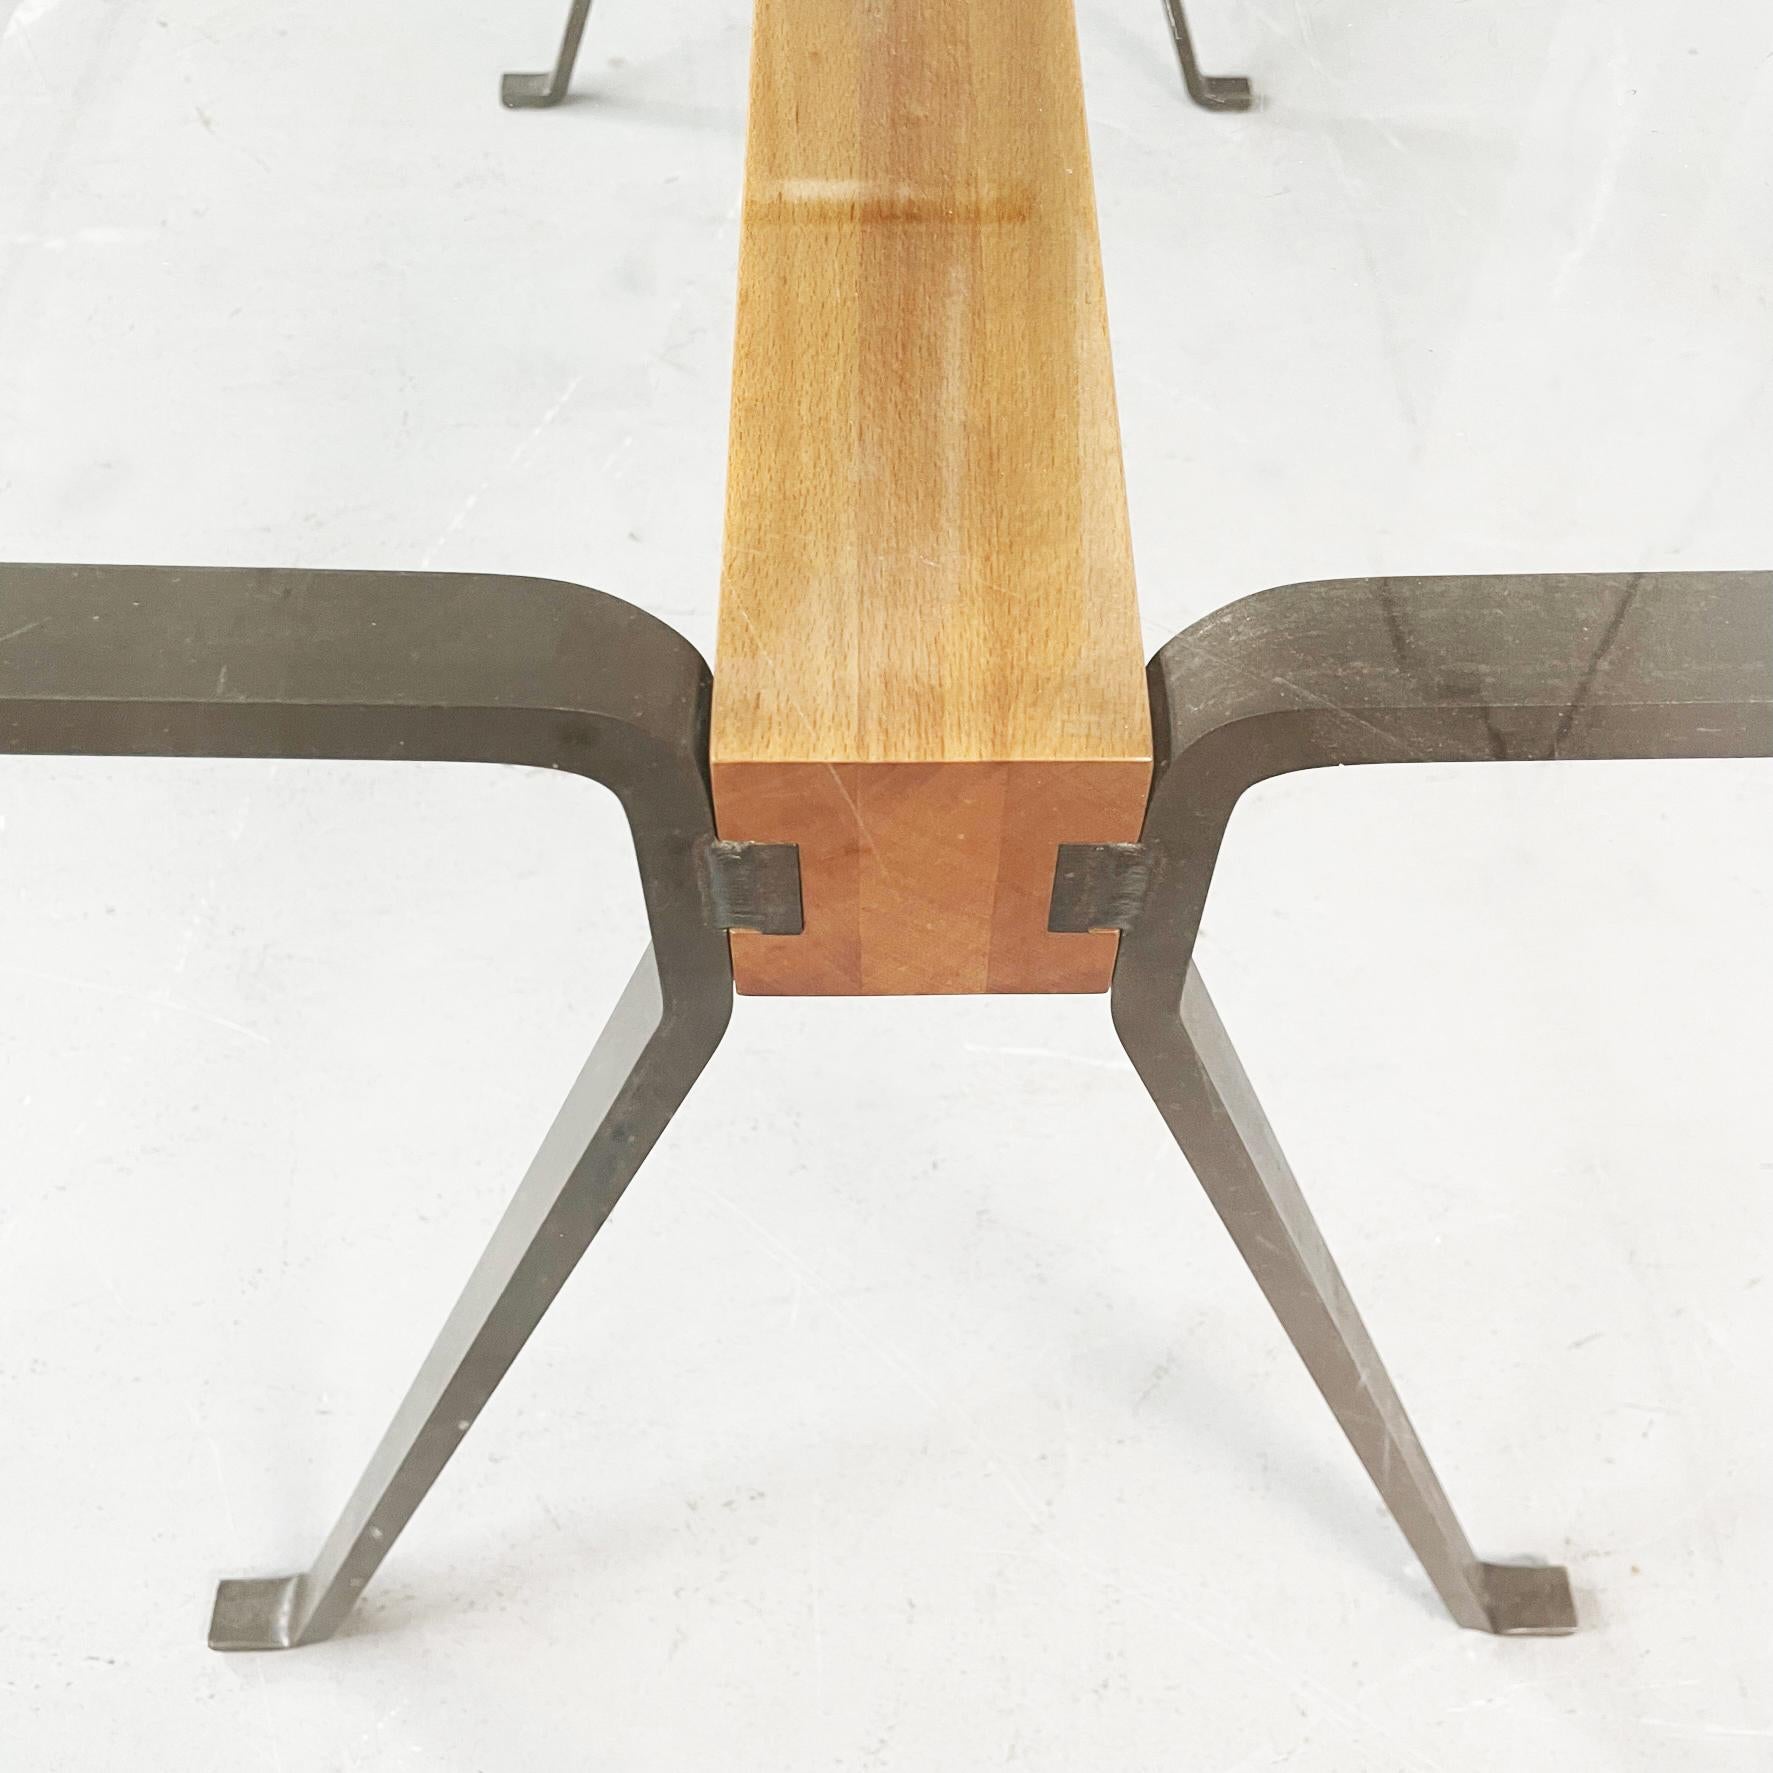 Italian Modern Glass Wood Steel Dining Table Frate by Enzo Mari for Driade, 1973 For Sale 6